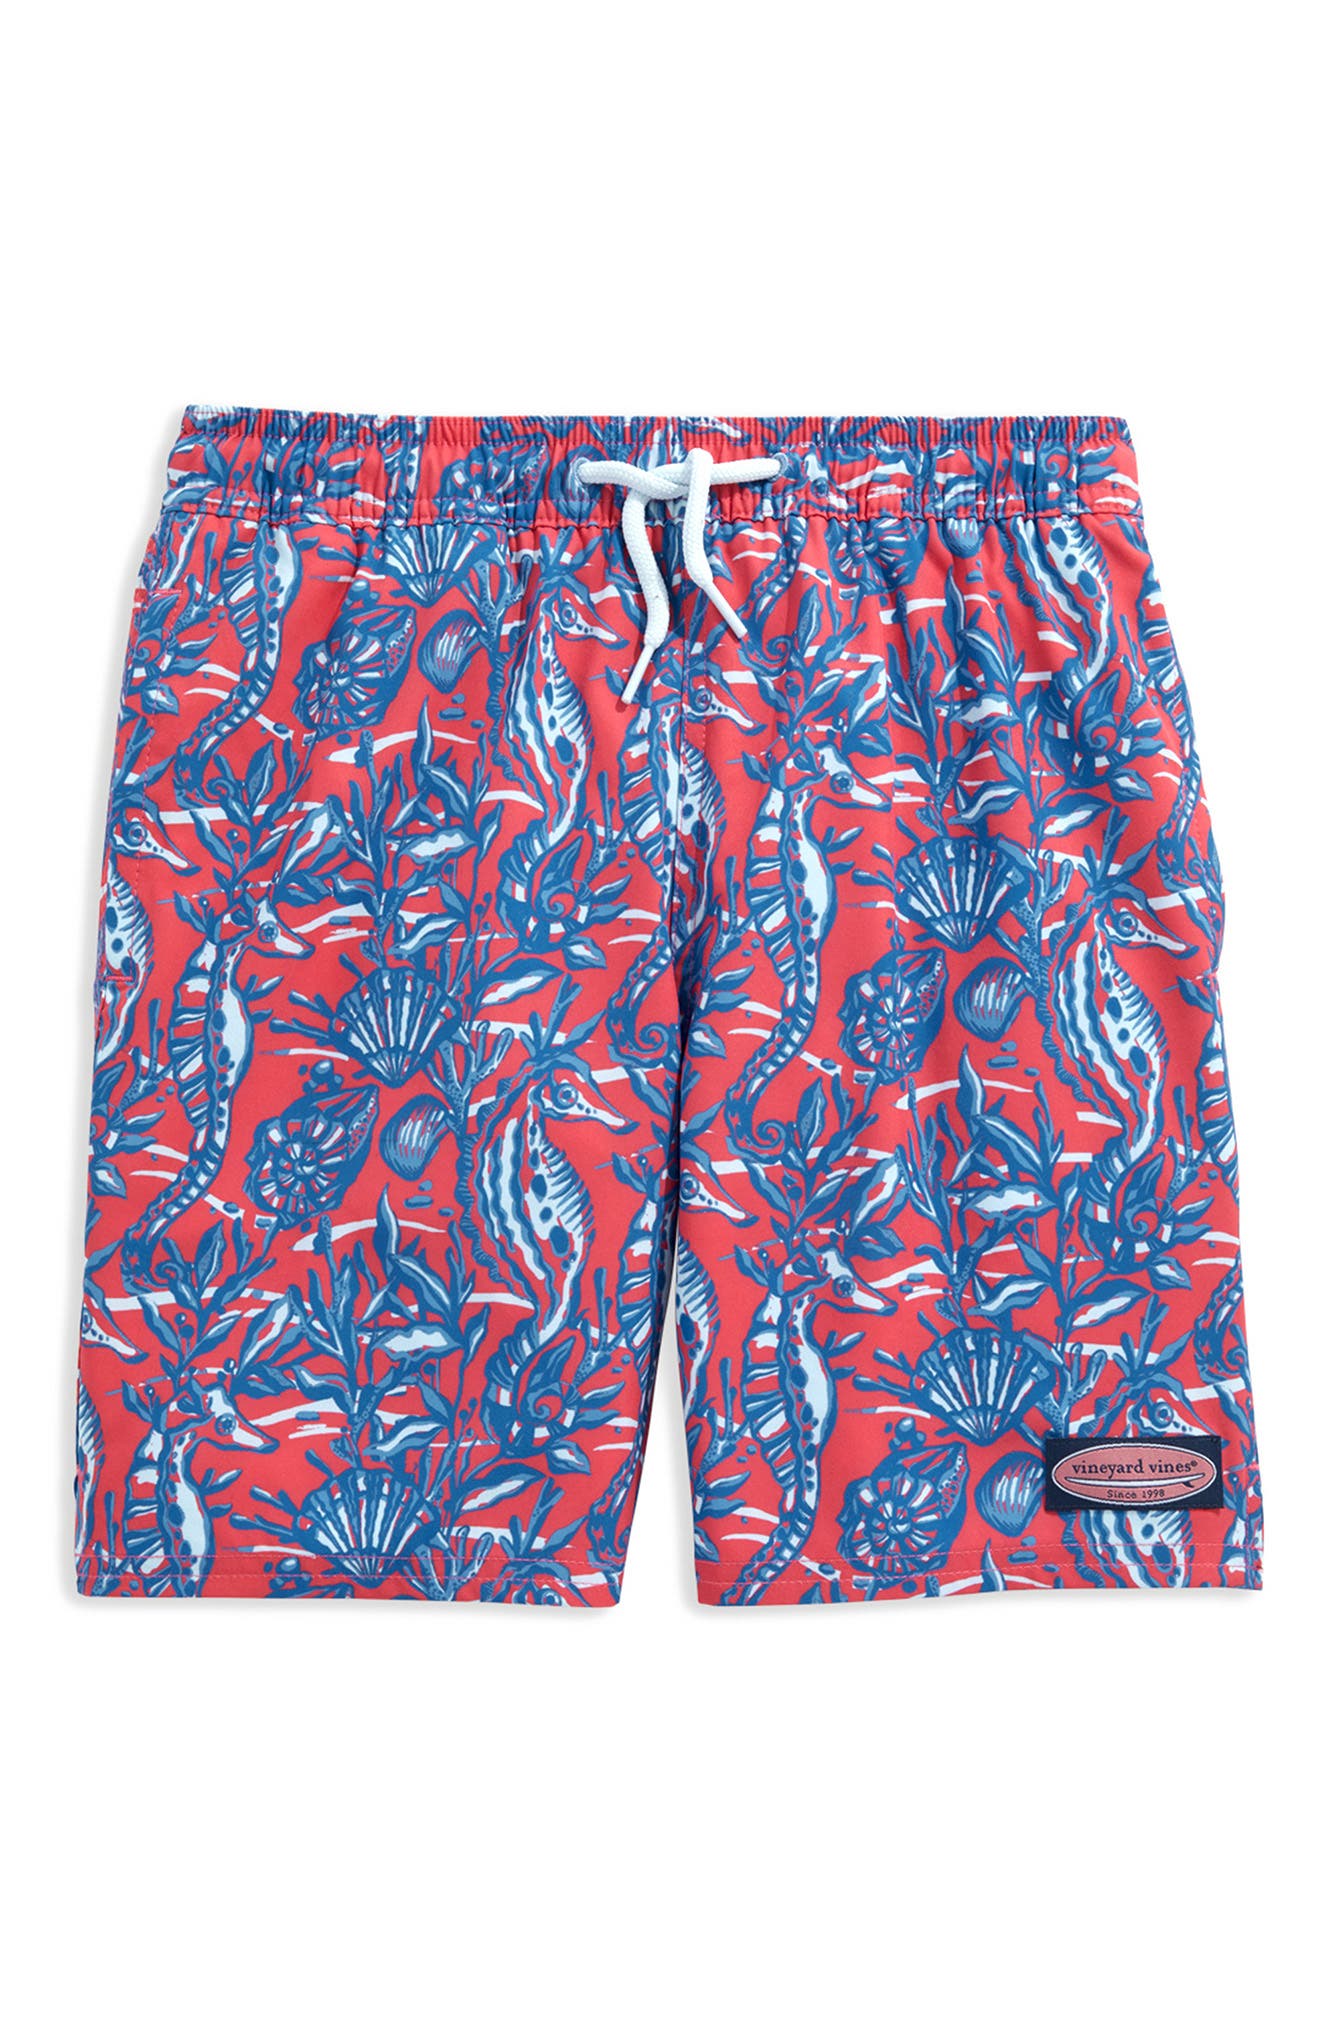 Mens Swim Trunks Cute Crabs Printed Beach Board Shorts with Pockets Cool Novelty Bathing Suits for Teen Boys